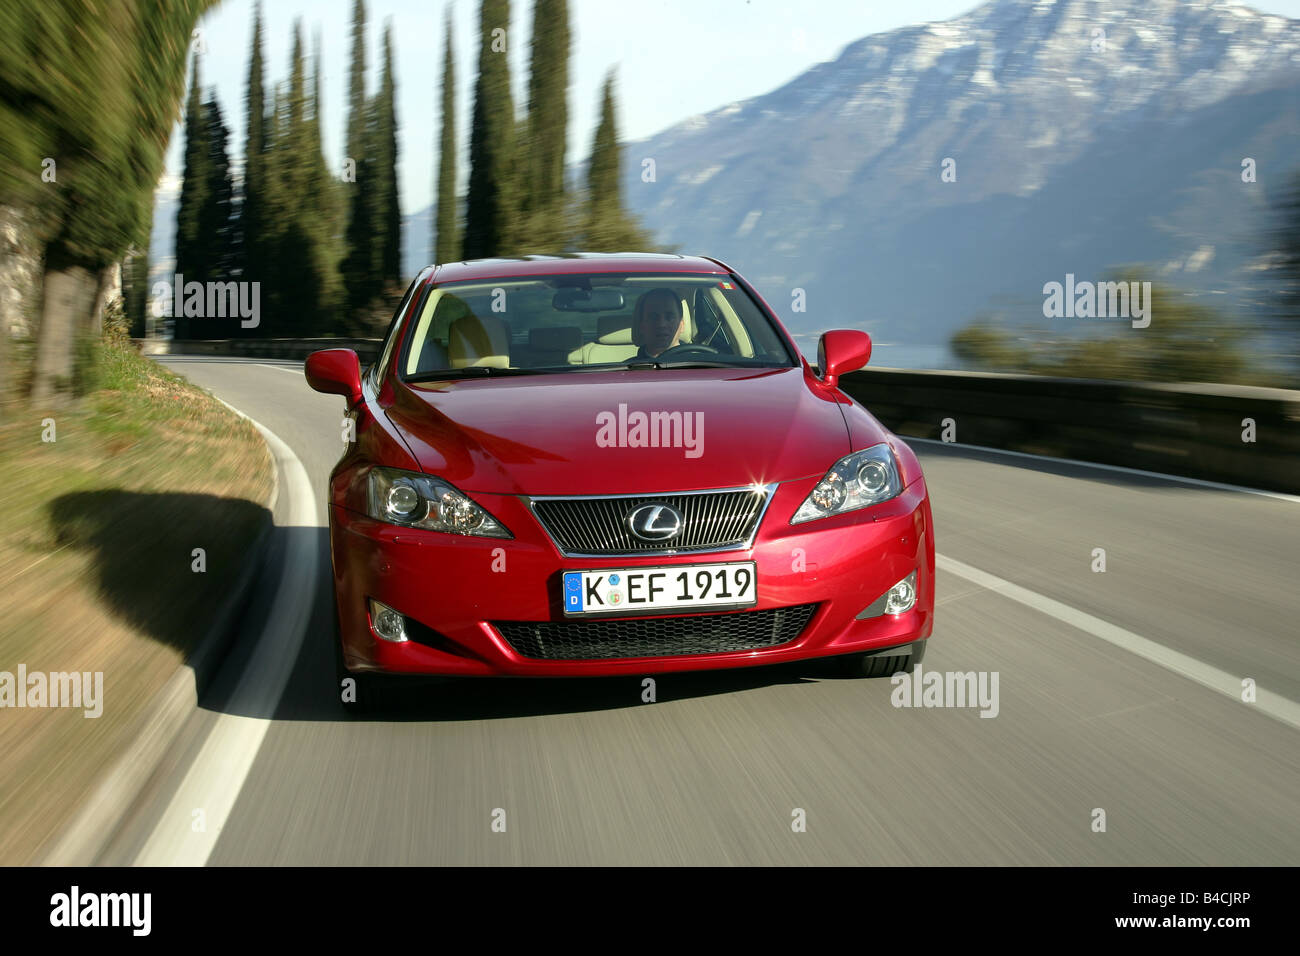 Lexus IS 250, model year 2005-, red, driving, diagonal from the front, frontal view, country road, Mountains Stock Photo